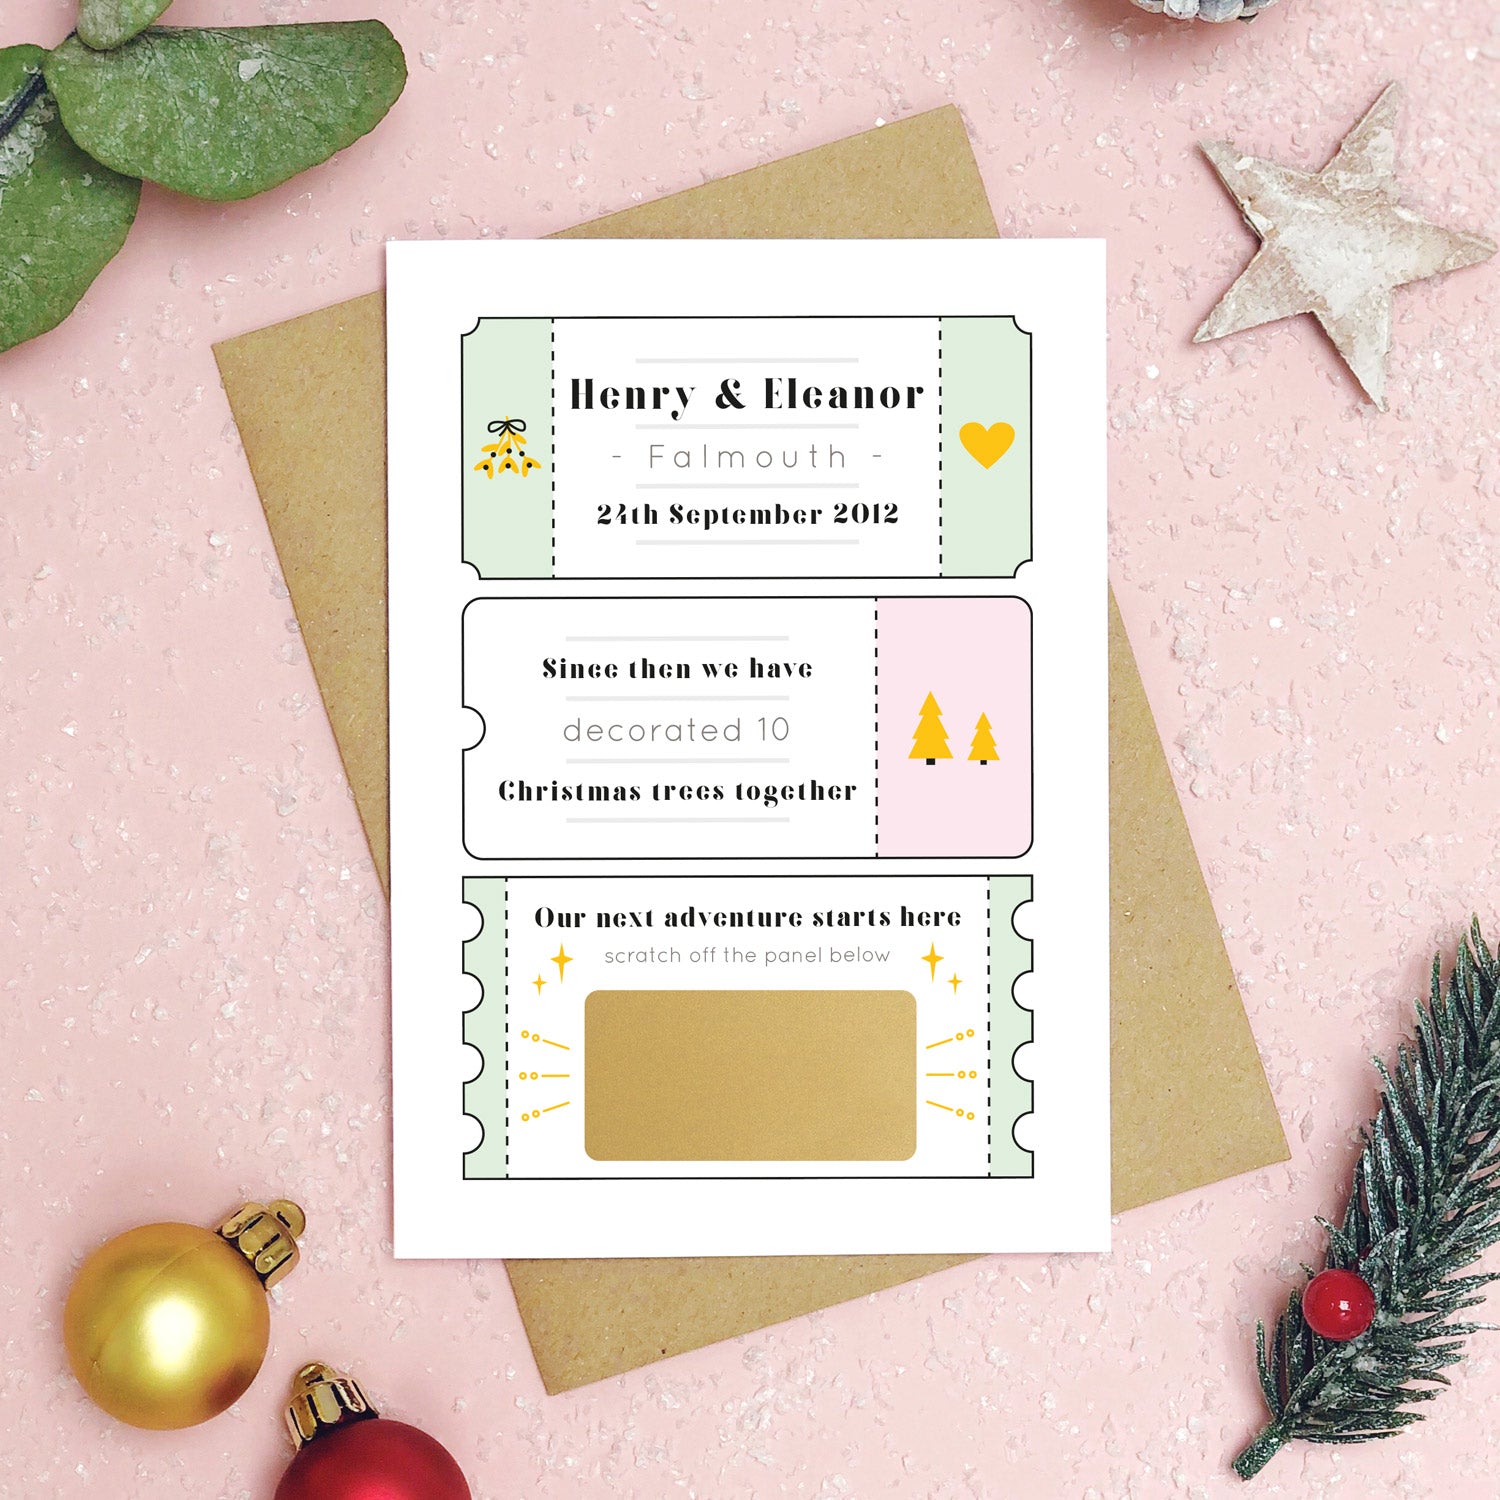 A personalised will you marry me christmas scratch card in pink and green lying flat a pink background with green foliage and gold and red baubles. The card is split up into tickets and the scratch panel has not yet been scratched off!